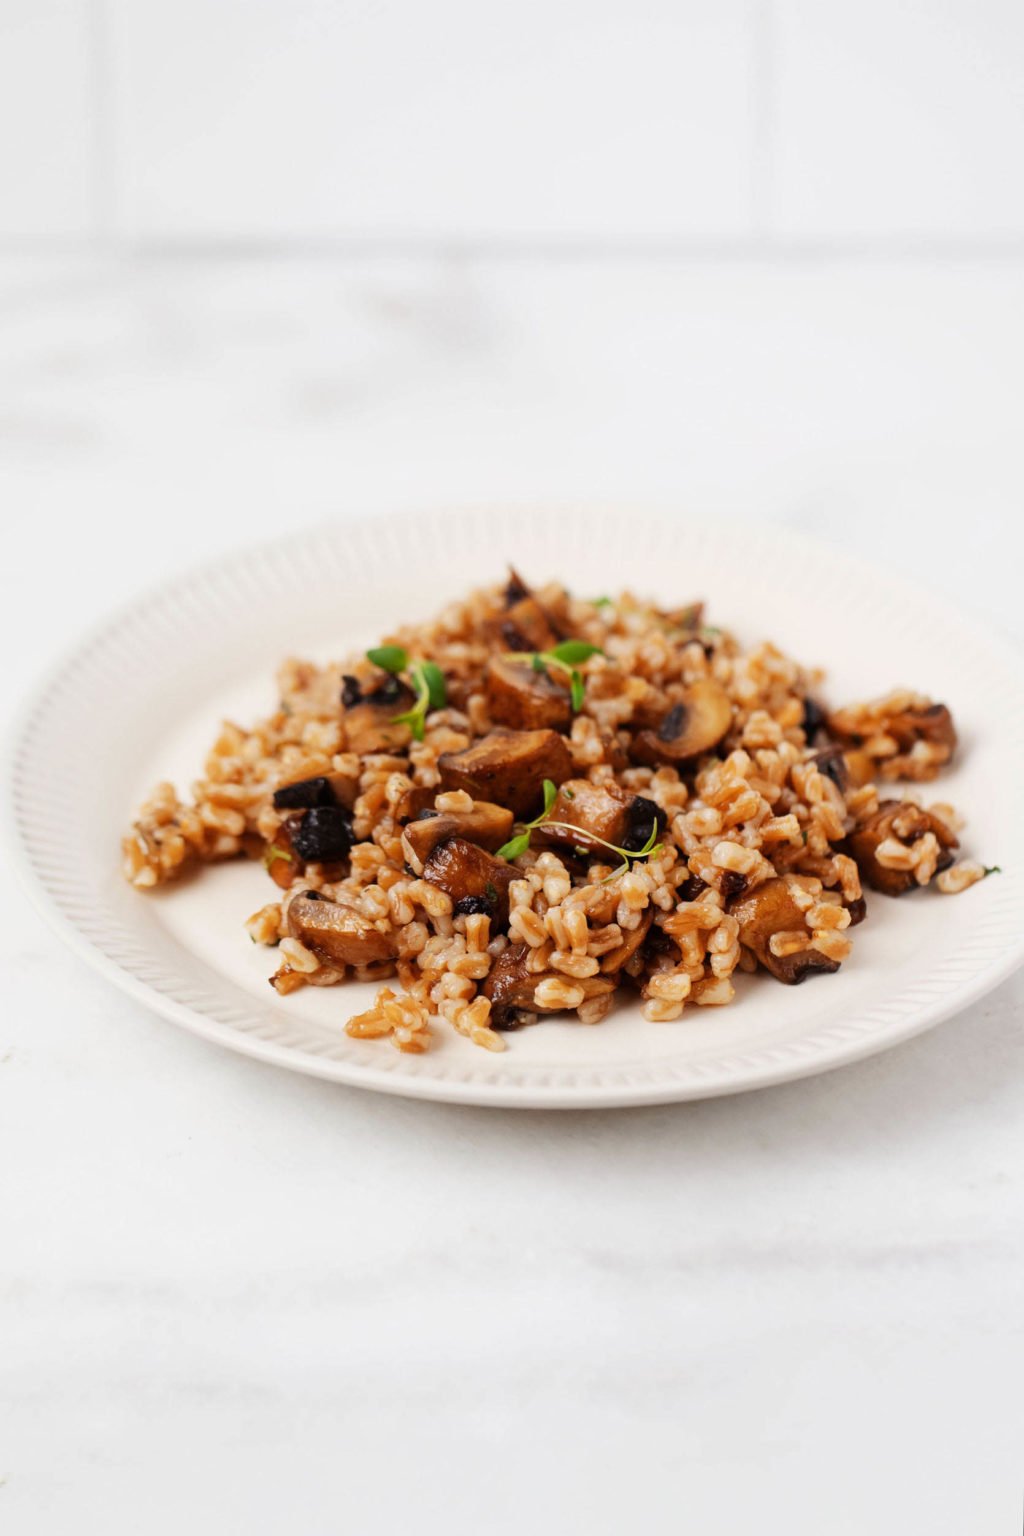 A white, rimmed plate holds a side dish of mushroom farro, topped with herbs. It rests on a white marble surface.